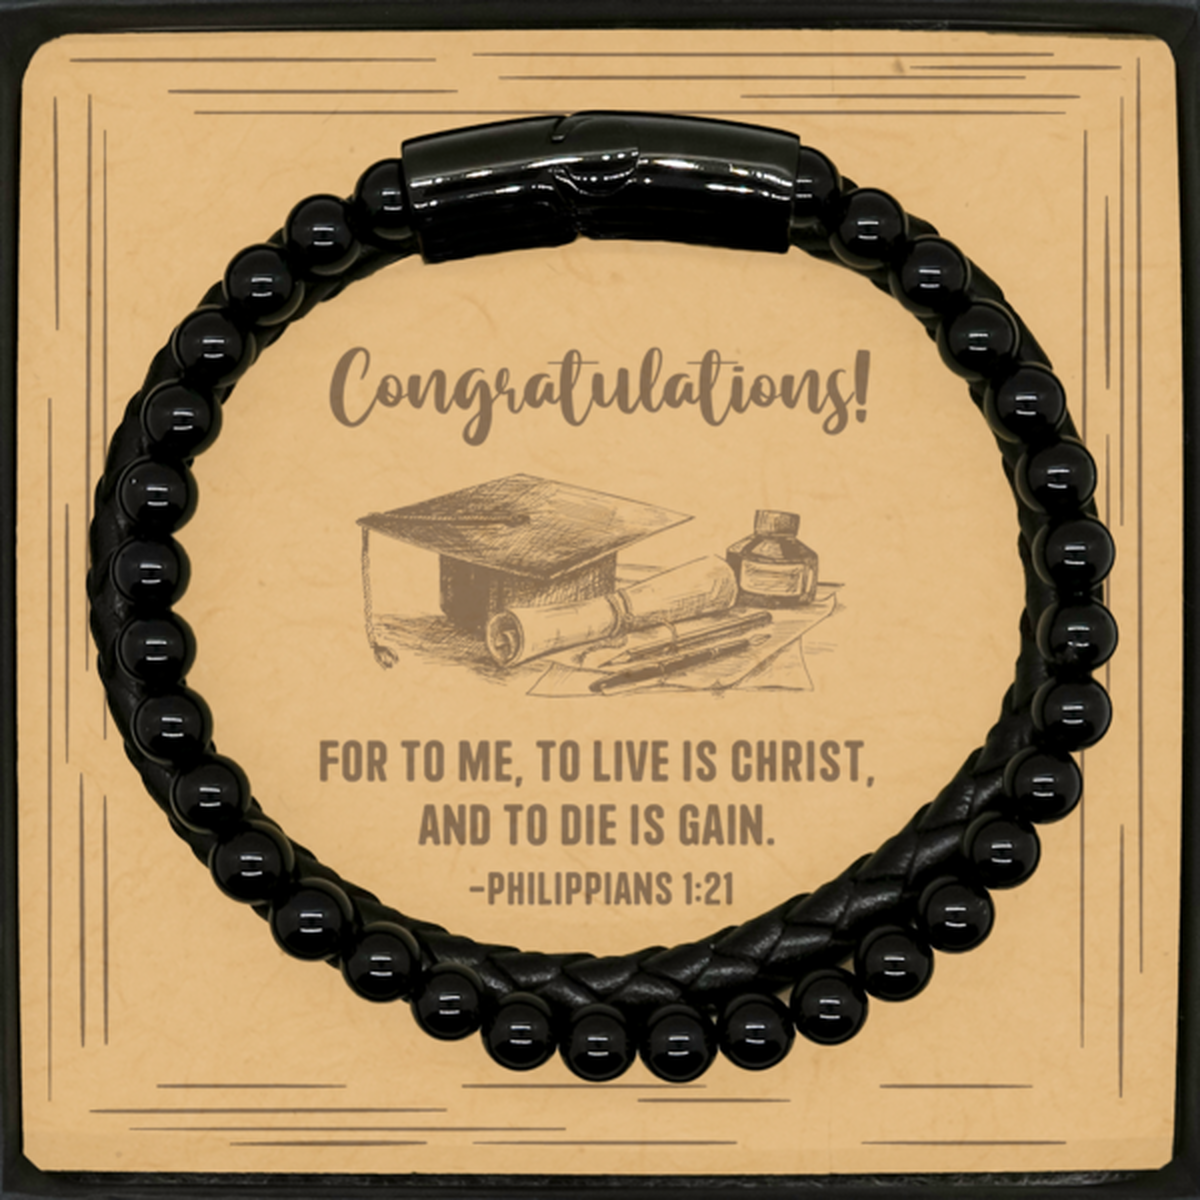 Religious Graduation Cards, For to me, to live is Christ, Bible Verse Stone Leather Bracelet, Christian Graduation Gifts